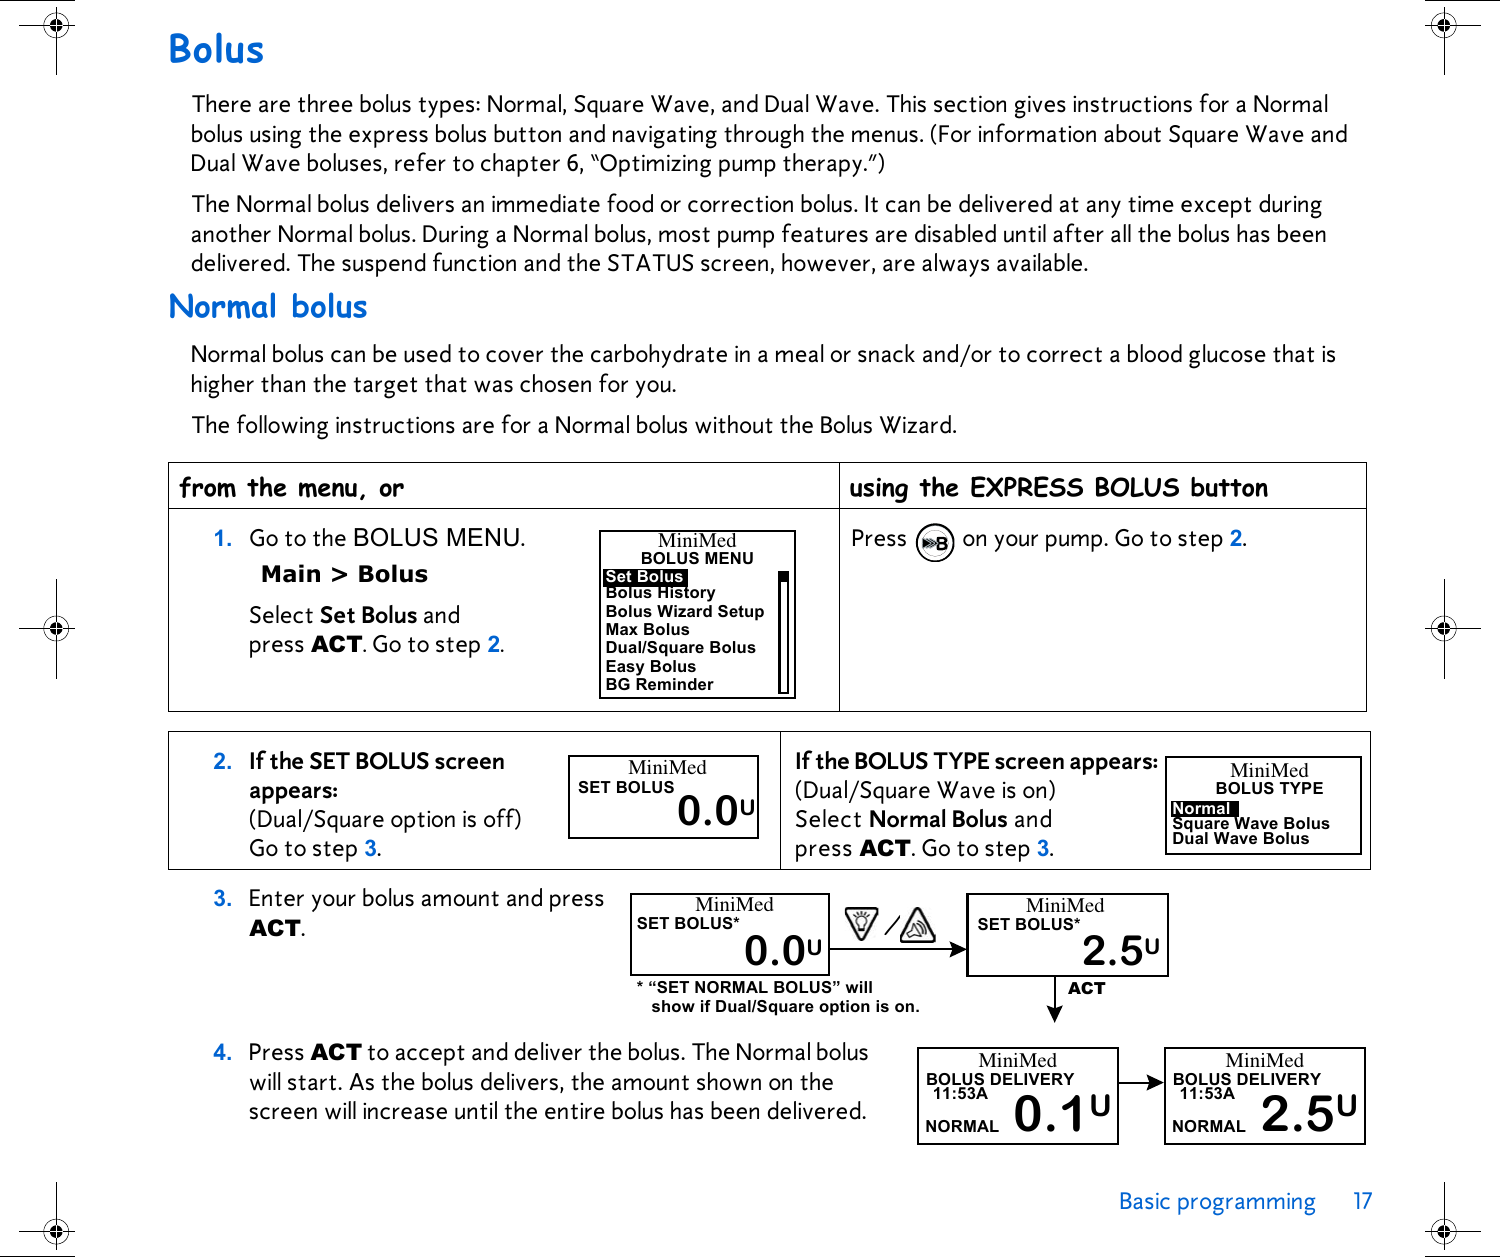 Basic programming 17 BolusThere are three bolus types: Normal, Square Wave, and Dual Wave. This section gives instructions for a Normal bolus using the express bolus button and navigating through the menus. (For information about Square Wave and Dual Wave boluses, refer to chapter 6, “Optimizing pump therapy.”) The Normal bolus delivers an immediate food or correction bolus. It can be delivered at any time except during another Normal bolus. During a Normal bolus, most pump features are disabled until after all the bolus has been delivered. The suspend function and the STATUS screen, however, are always available.Normal bolusNormal bolus can be used to cover the carbohydrate in a meal or snack and/or to correct a blood glucose that is higher than the target that was chosen for you.The following instructions are for a Normal bolus without the Bolus Wizard.4. Press ACT to accept and deliver the bolus. The Normal bolus will start. As the bolus delivers, the amount shown on the screen will increase until the entire bolus has been delivered. from the menu, or  using the EXPRESS BOLUS button1. Go to the BOLUS MENU.Main &gt; BolusSelect Set Bolus and press ACT. Go to step 2.Press  on your pump. Go to step 2.2. If the SET BOLUS screen appears: (Dual/Square option is off)Go to step 3. If the BOLUS TYPE screen appears: (Dual/Square Wave is on) Select Normal Bolus and press ACT. Go to step 3.3. Enter your bolus amount and press ACT.MiniMedBOLUS MENUBolus HistoryBolus Wizard SetupMax BolusDual/Square BolusEasy BolusBG ReminderSet BolusMiniMedSET BOLUS0.0UMiniMedBOLUS TYPESquare Wave BolusDual Wave BolusNormalMiniMedSET BOLUS*0.0UMiniMedSET BOLUS*2.5UACT/* “SET NORMAL BOLUS” will show if Dual/Square option is on.MiniMedBOLUS DELIVERY0.1U11:53ANORMALMiniMedBOLUS DELIVERY2.5U11:53ANORMAL